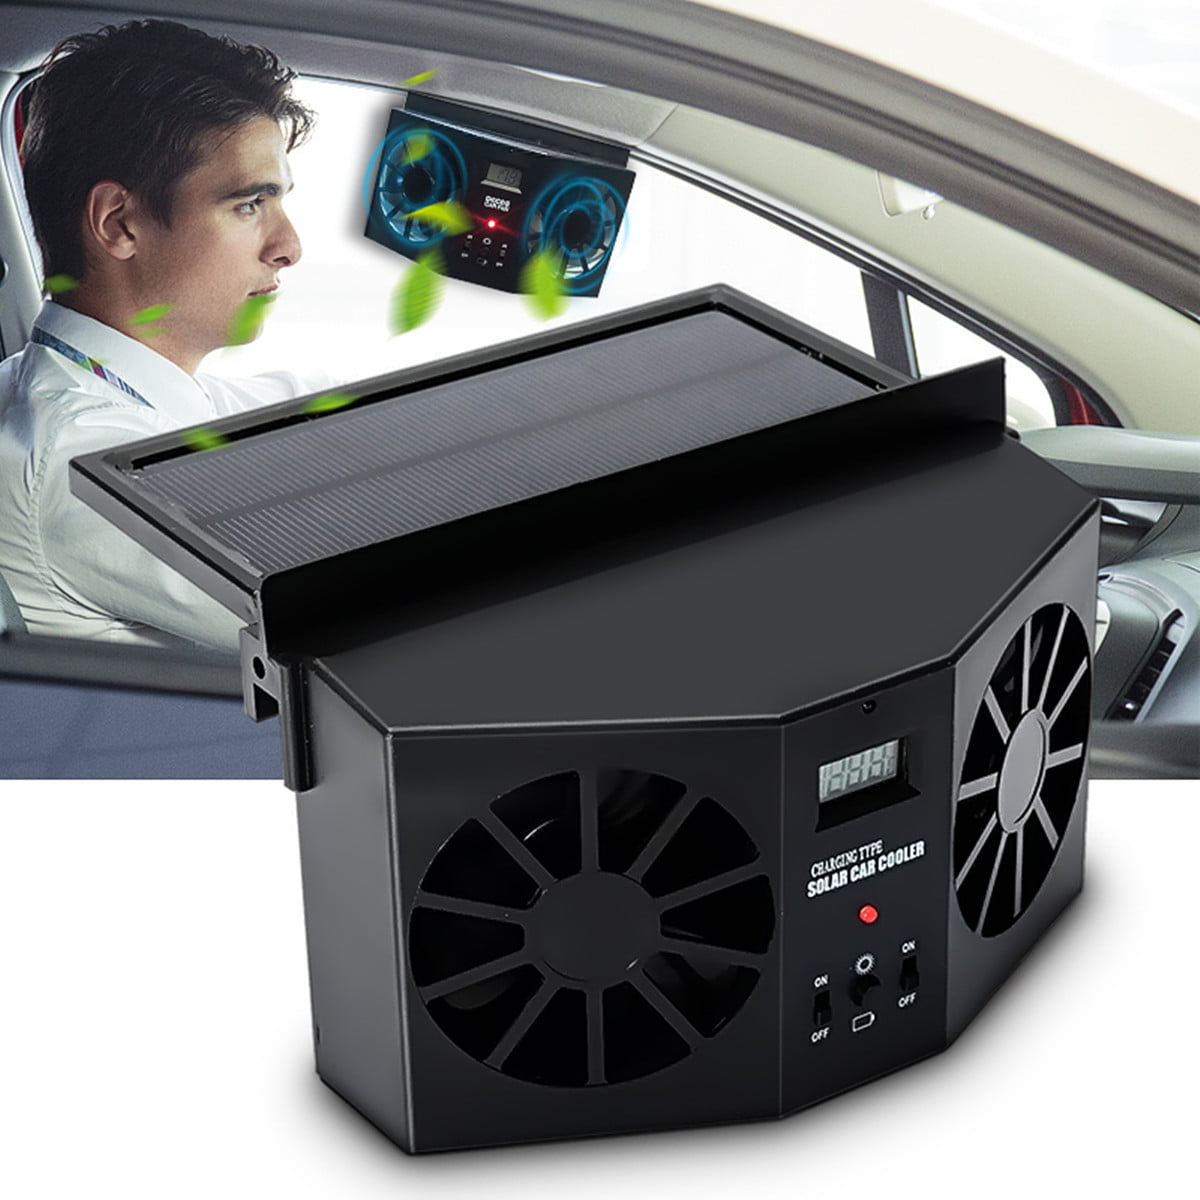 Gtest Portable Car Solar Powered Exhaust Fan Cooler Vehicle Window Windshield Auto Ventilation Fan Dual Power Supply with Rechargeable Battery 